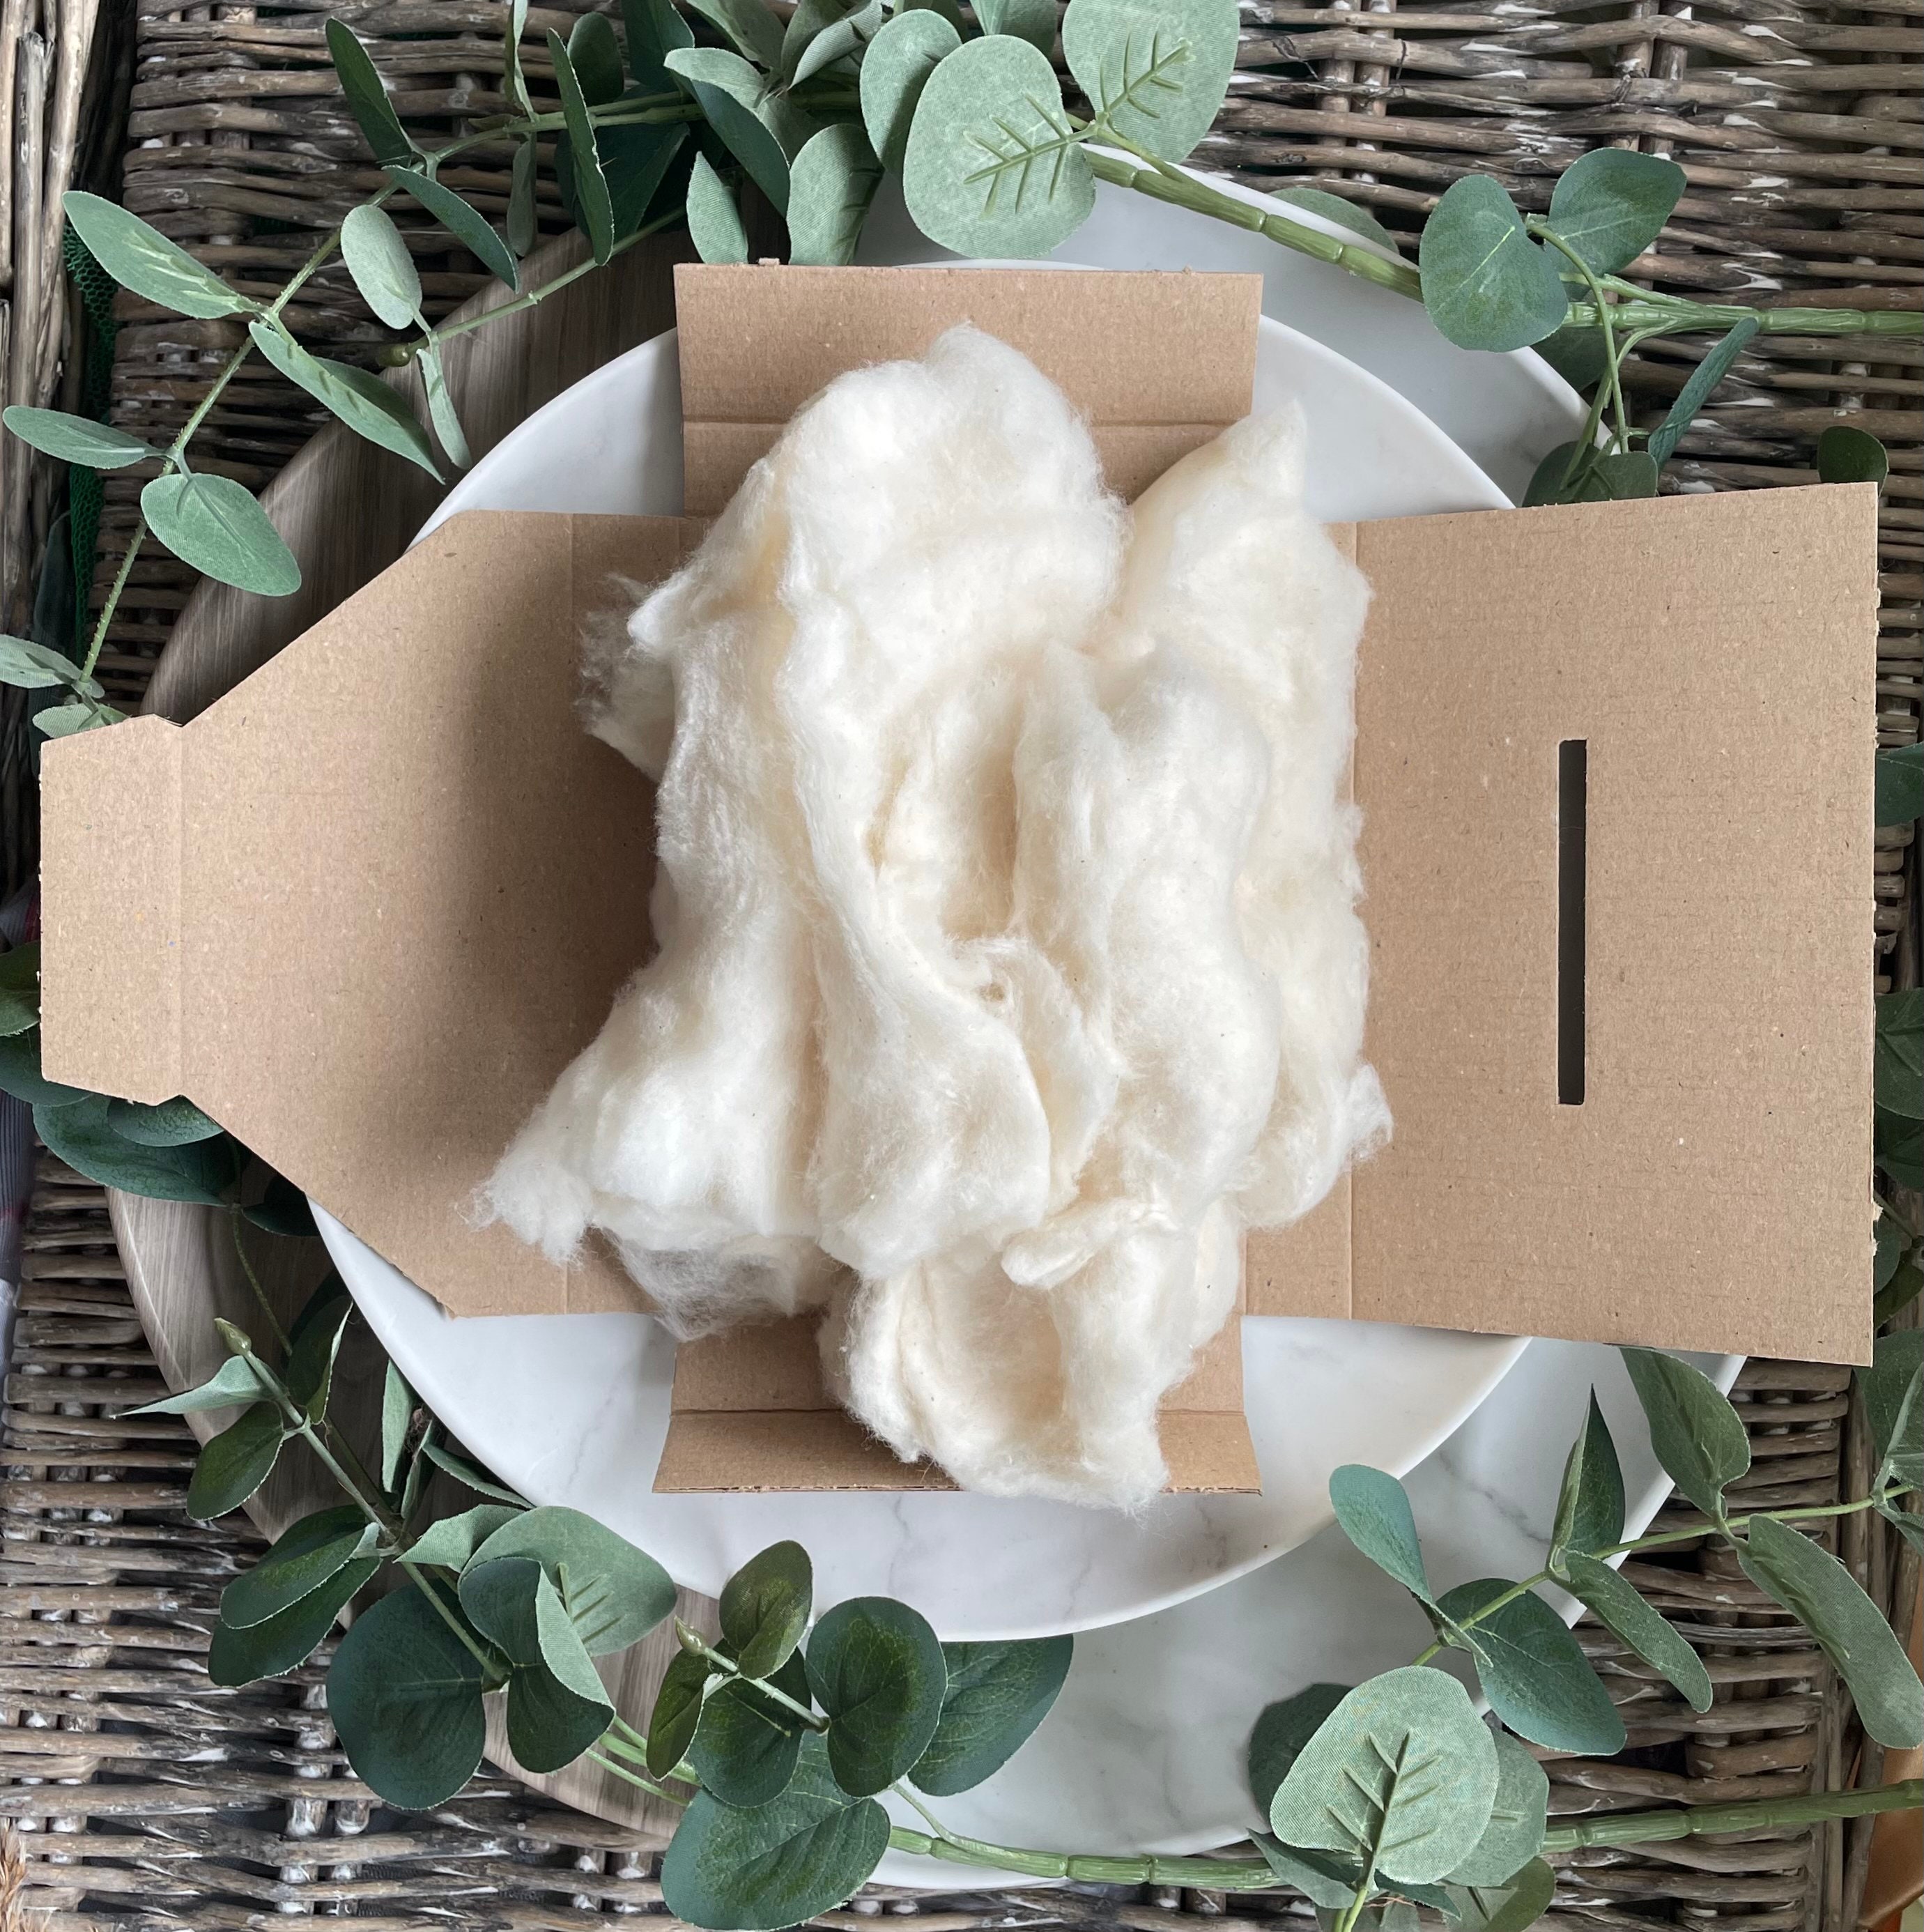 Grown in The USA Raw Cotton Stuffing / Batting. 3lb